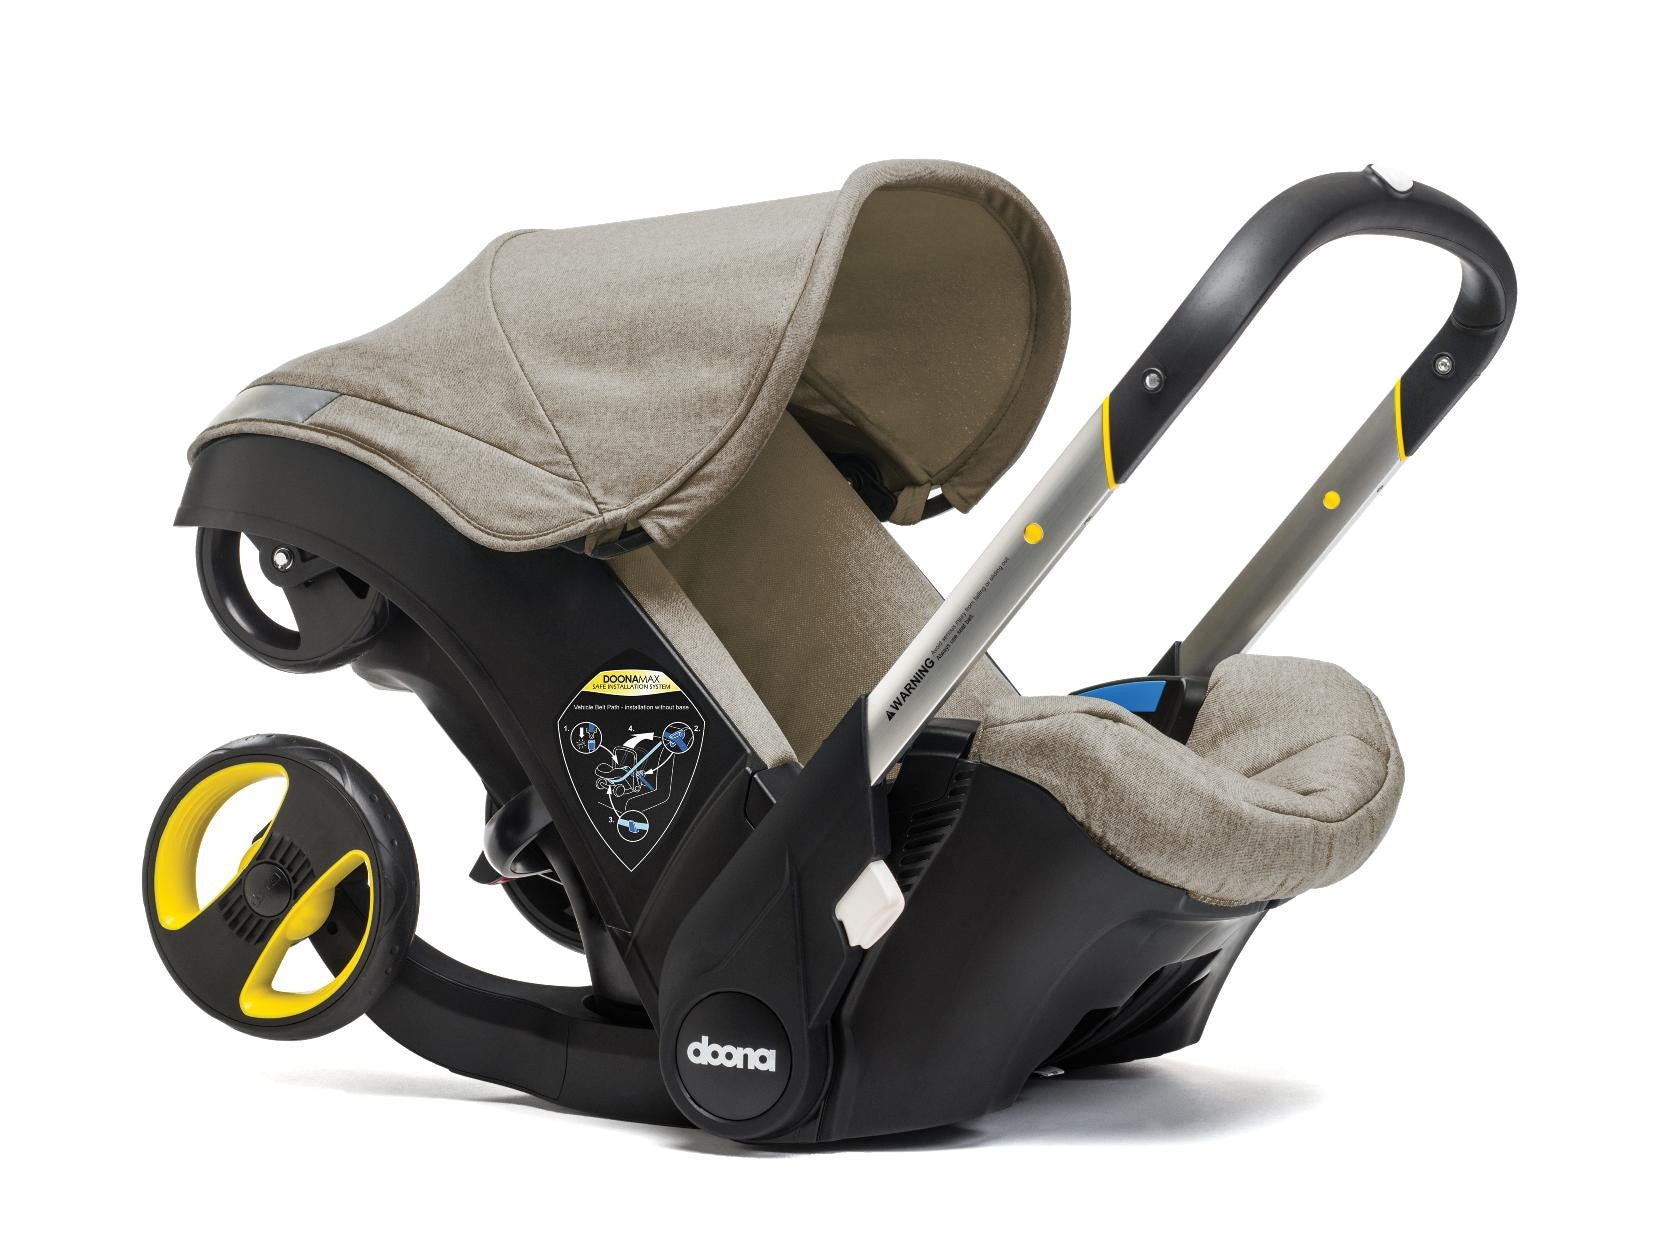 Doona Infant Car Seat and Stroller